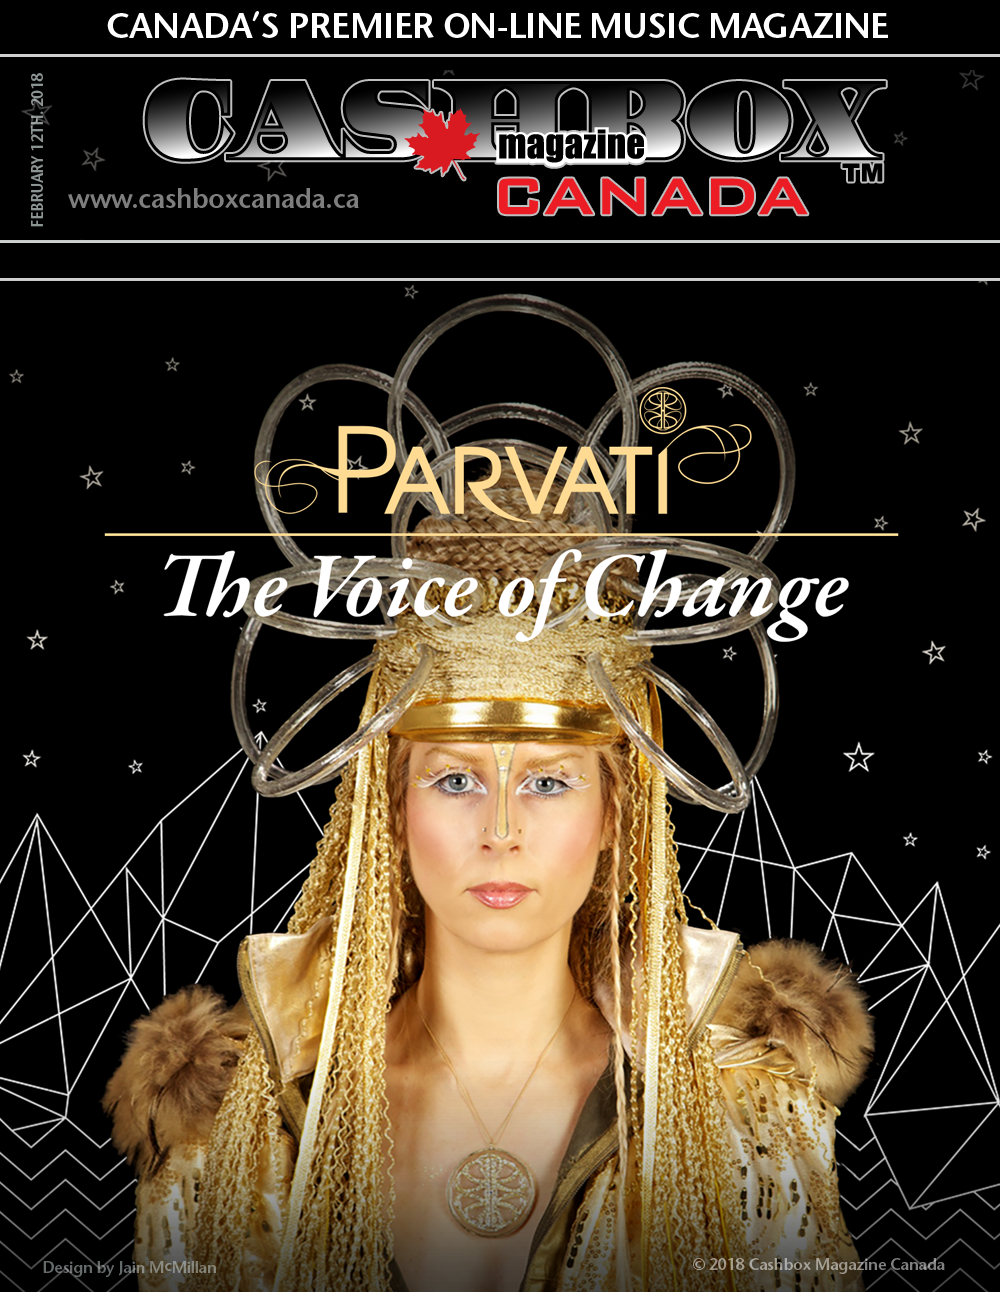 PARVATI: The Voice of Change